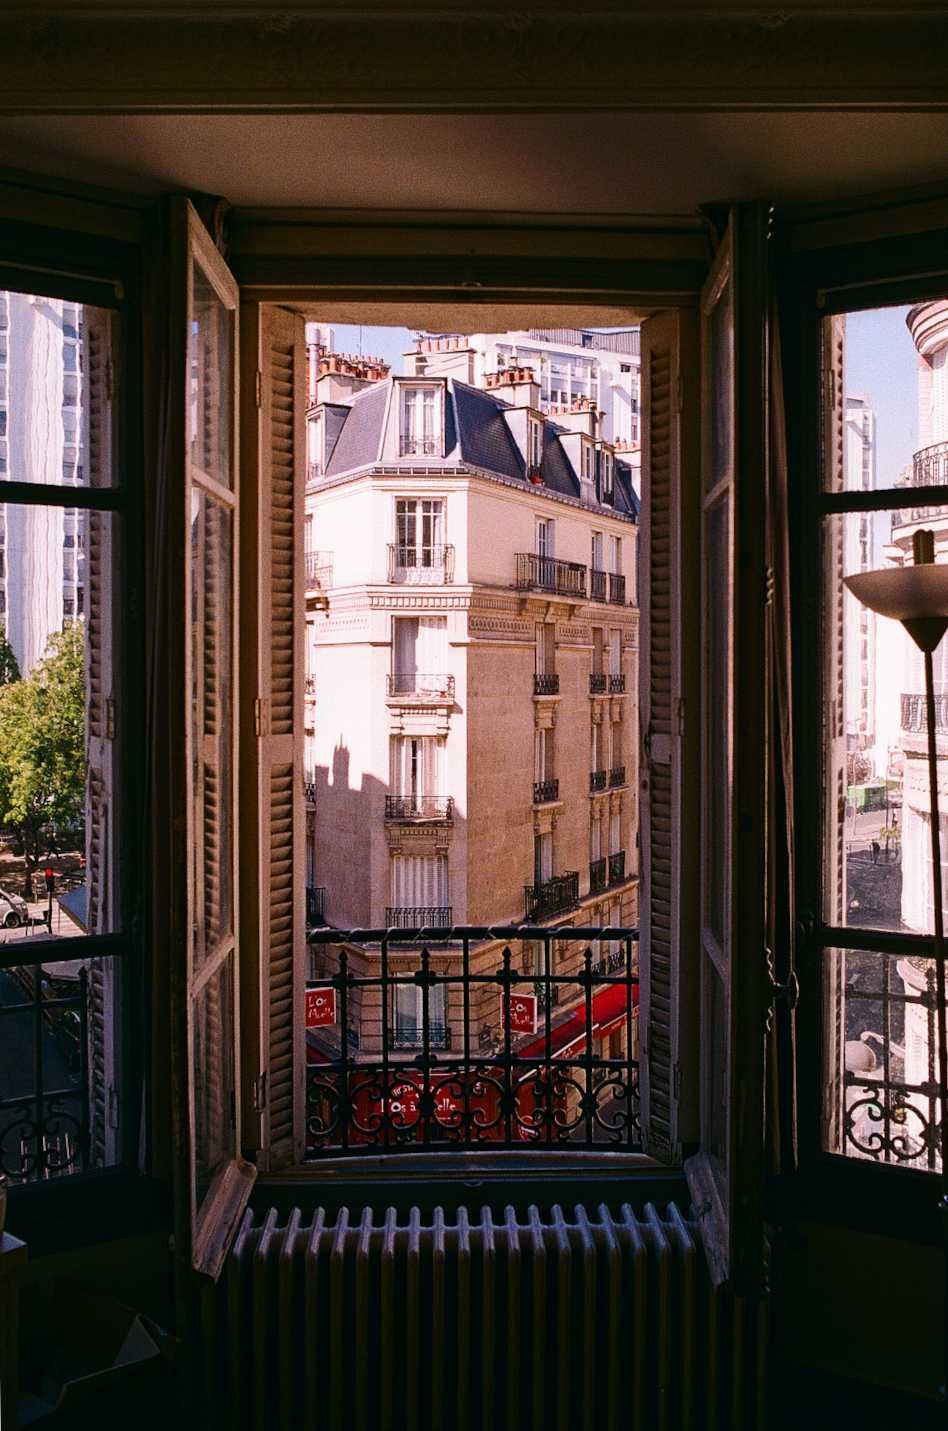 A classic French-style window framing a view of a classic Parisian multi-story stone-clad building